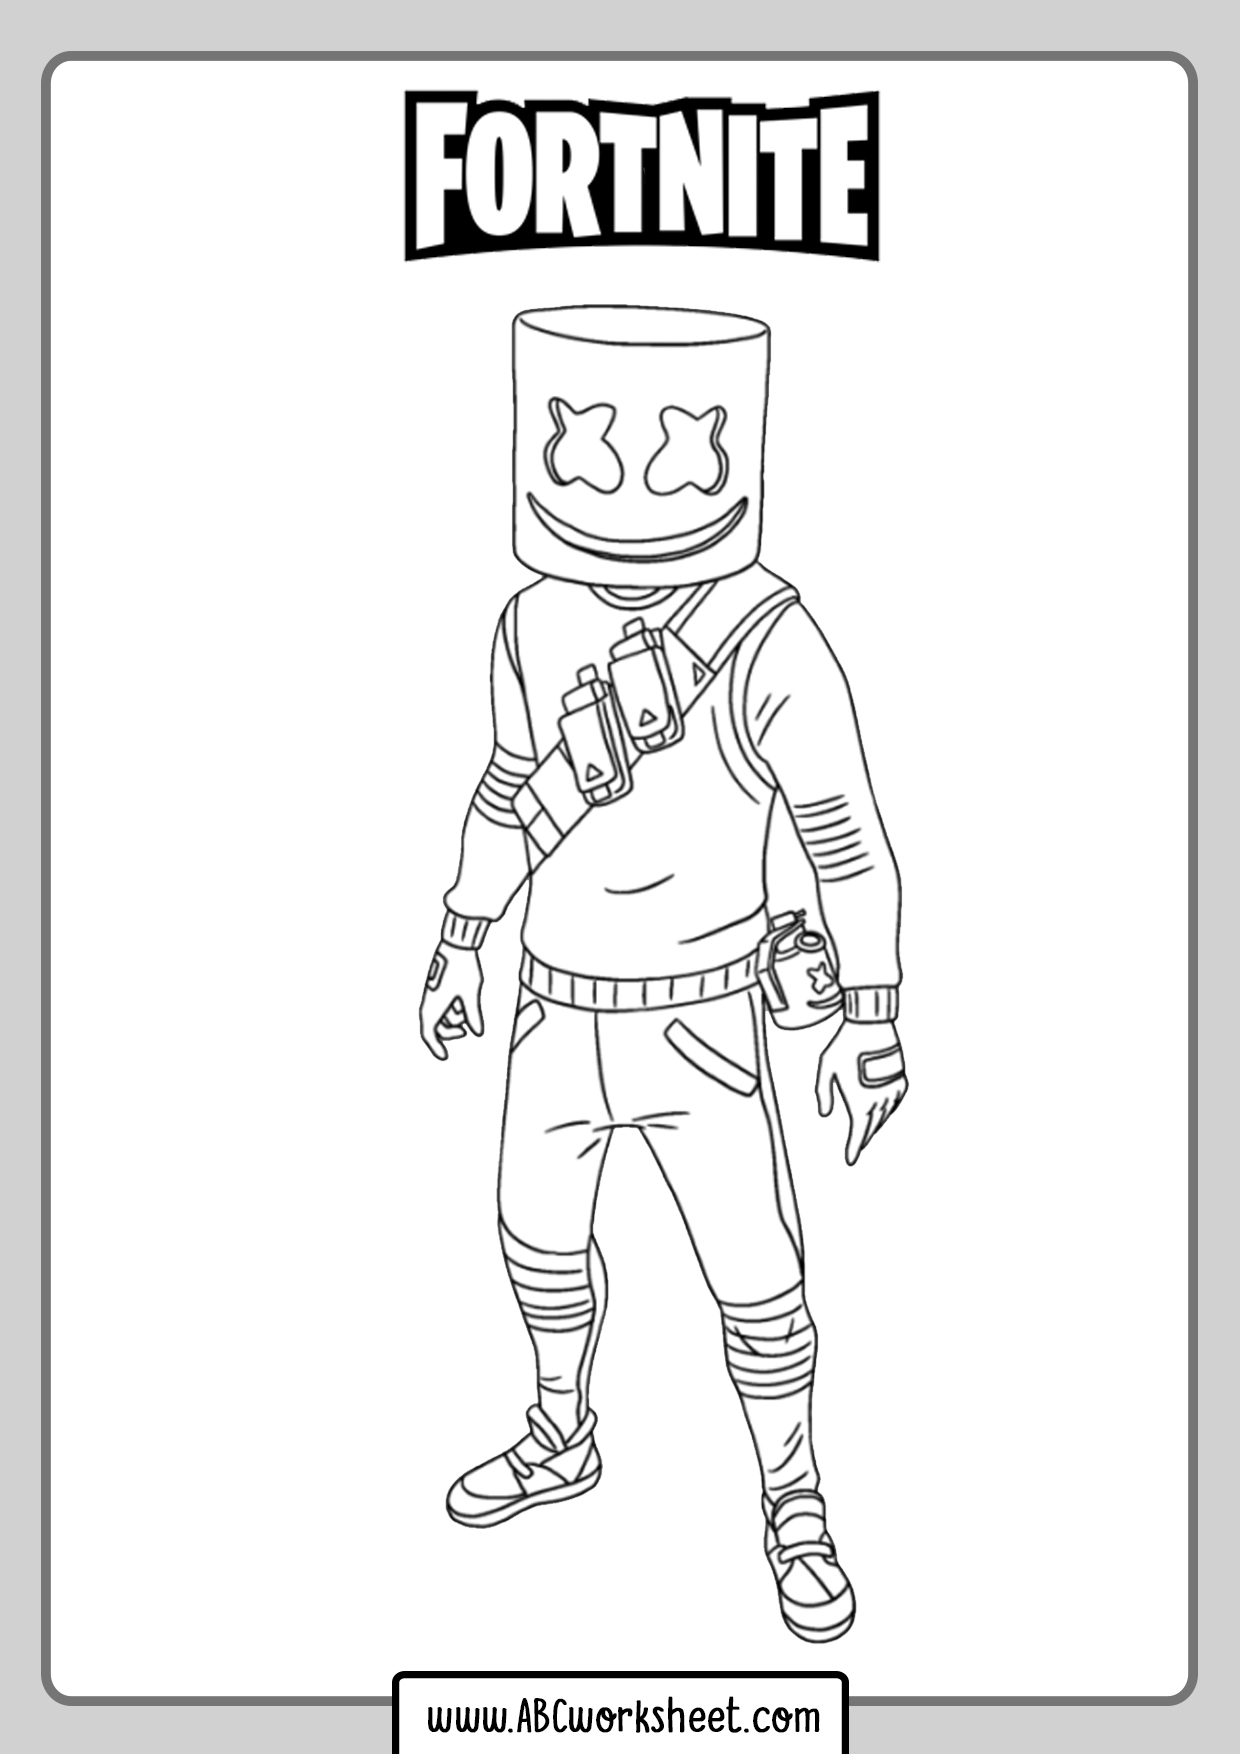 584 Cartoon Free Printable Fortnite Coloring Pages 